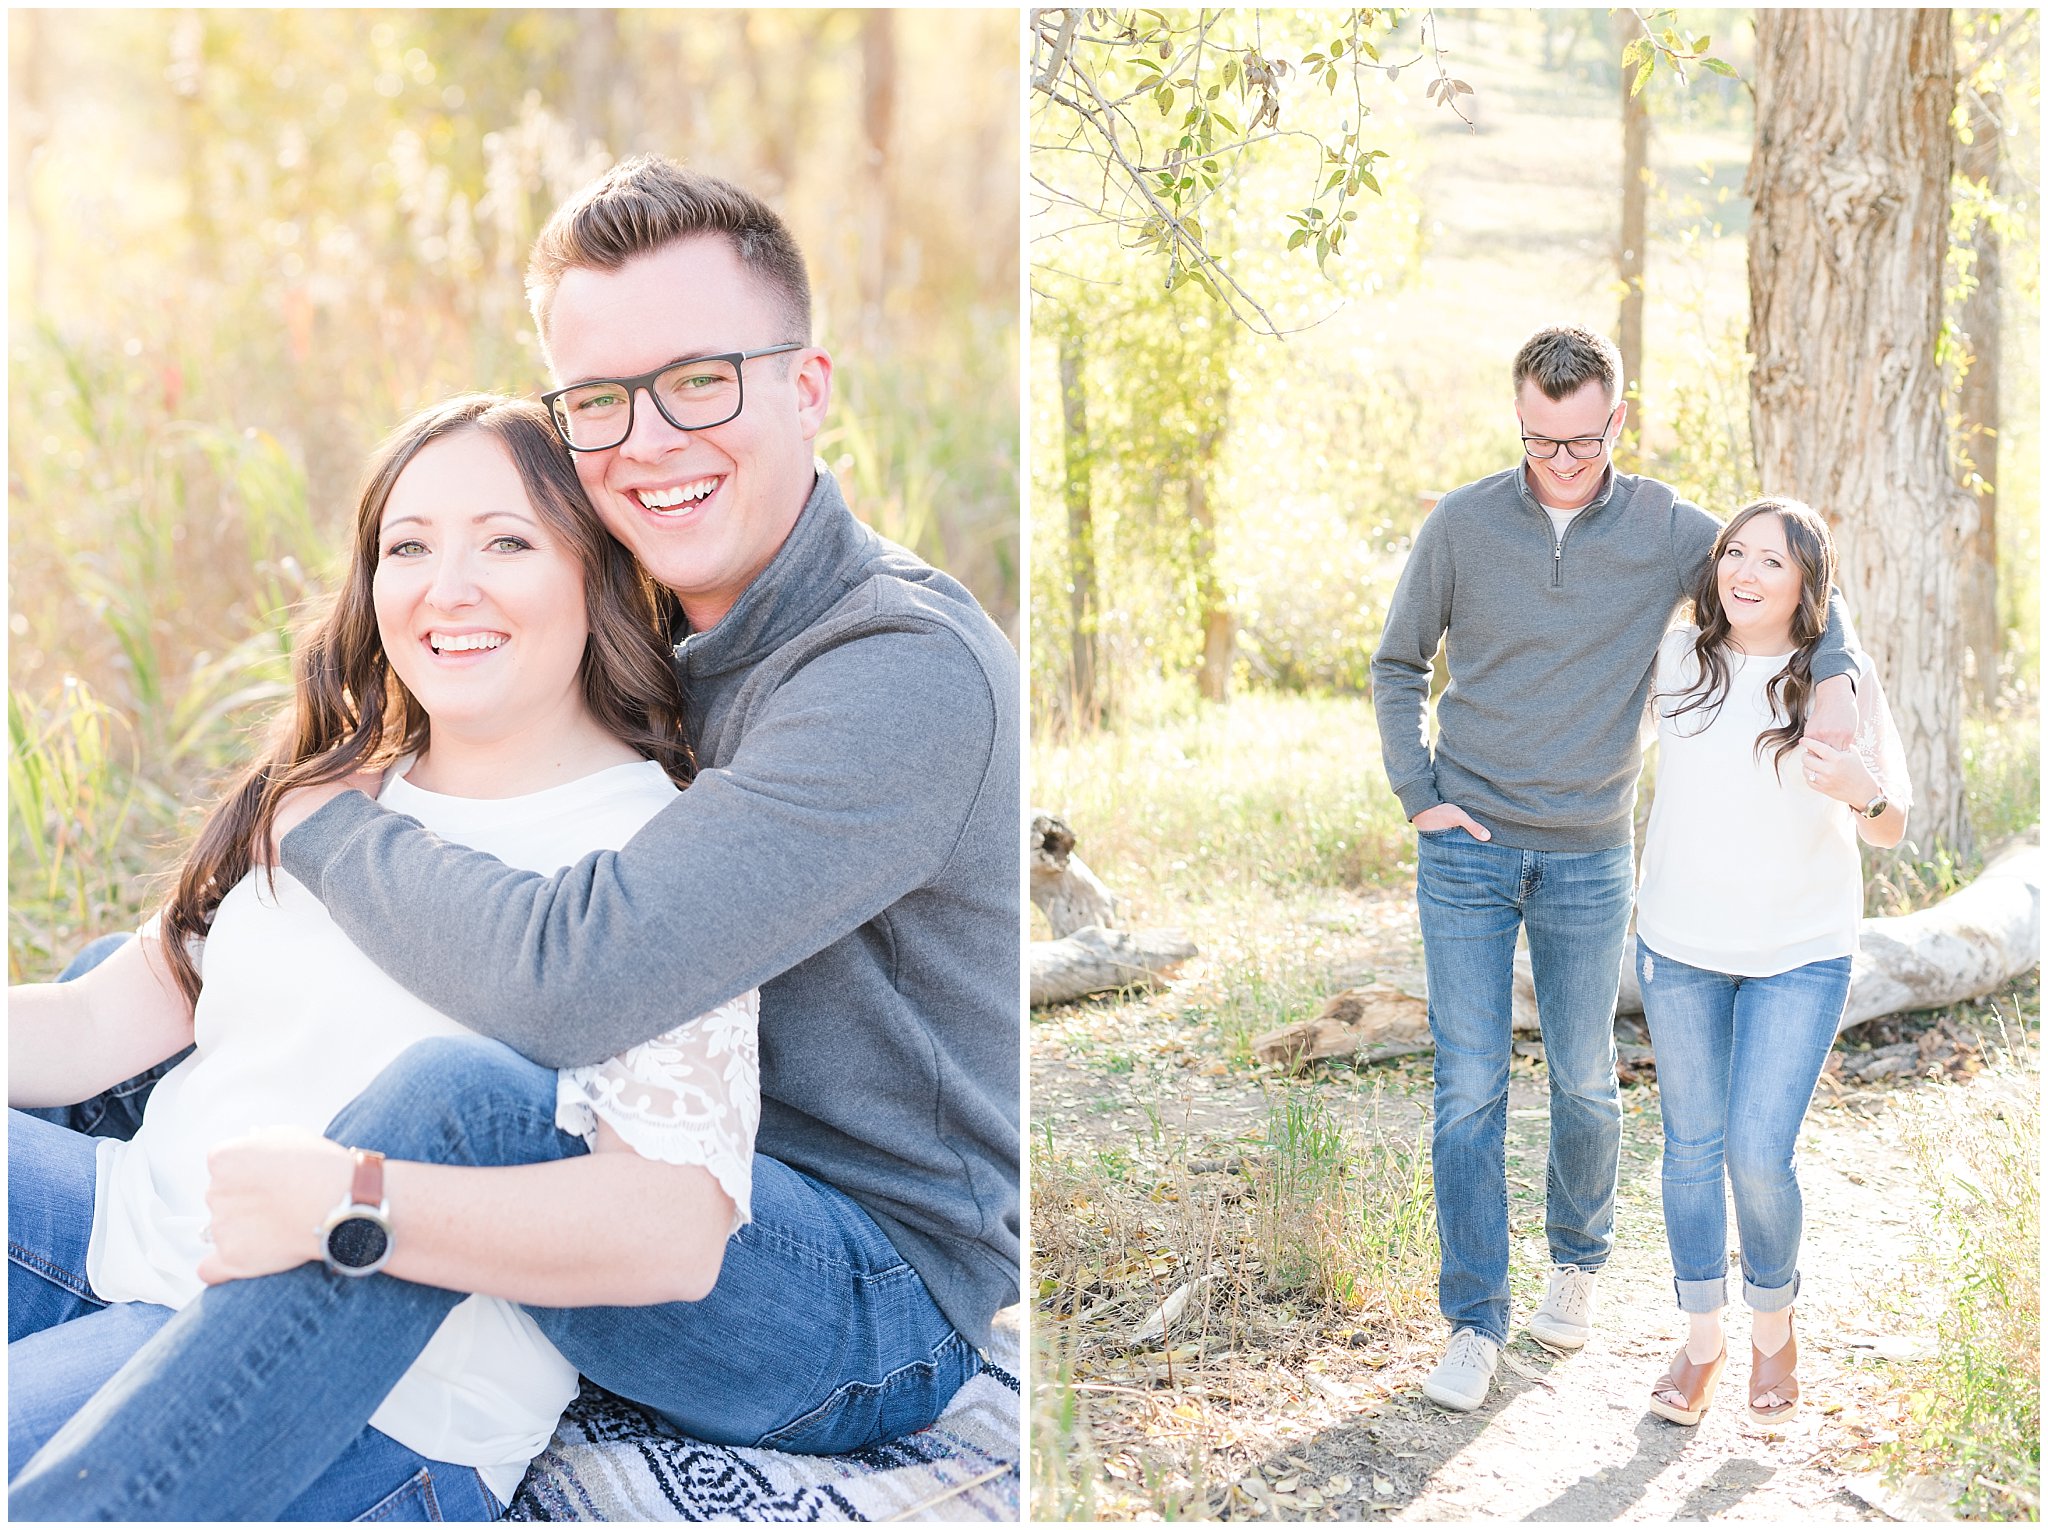 Couple in casual outfit with grey sweater, white top and jeans | Snowbasin woods and fall trees | A Classic Snowbasin Fall Engagement Session | Jessie and Dallin Photography